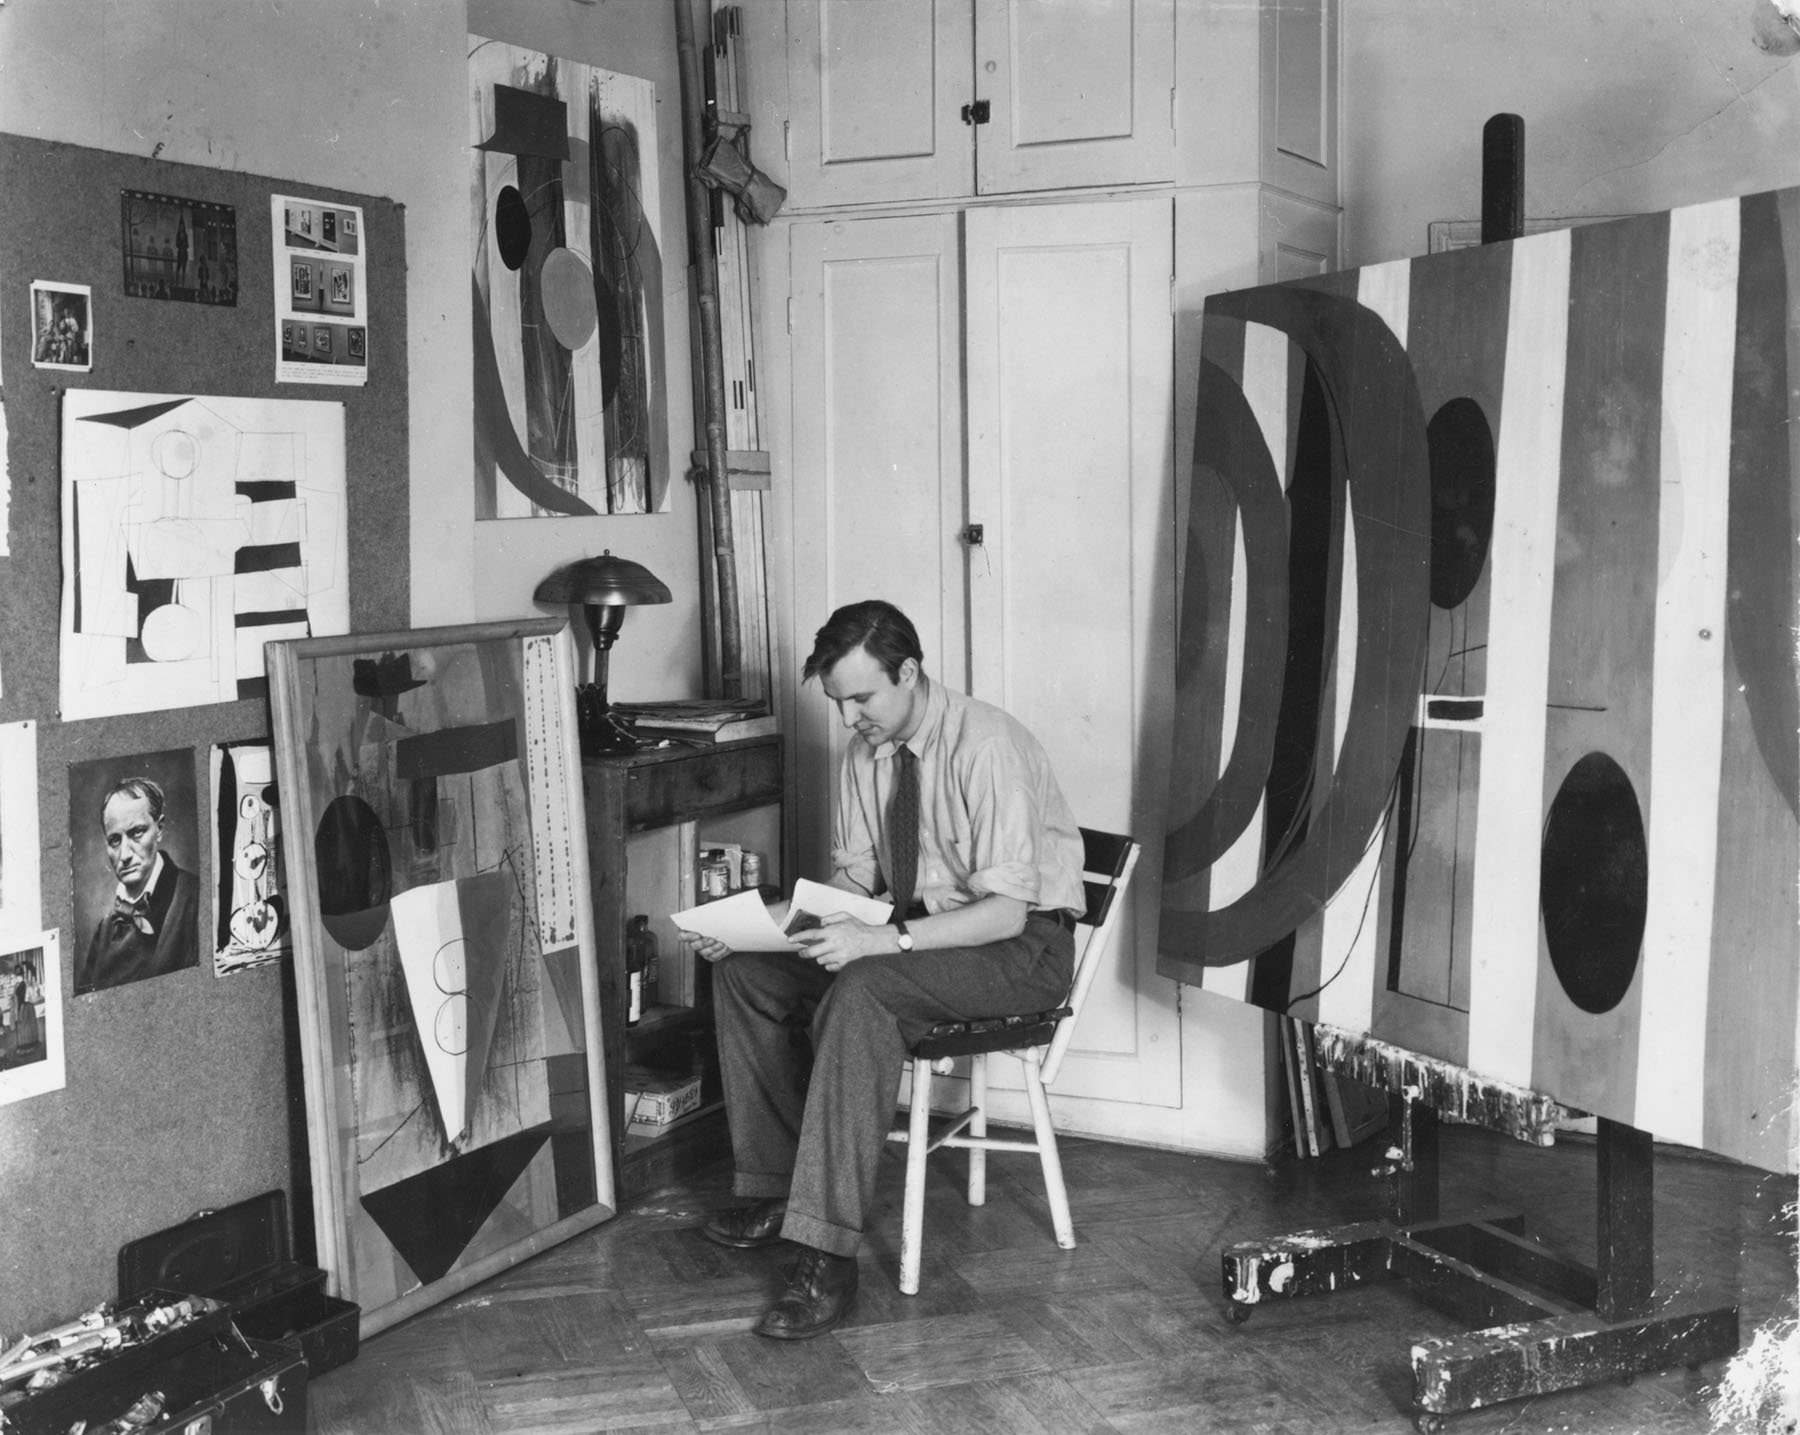 A black-and-white photograph of artist Robert Motherwell in his studio